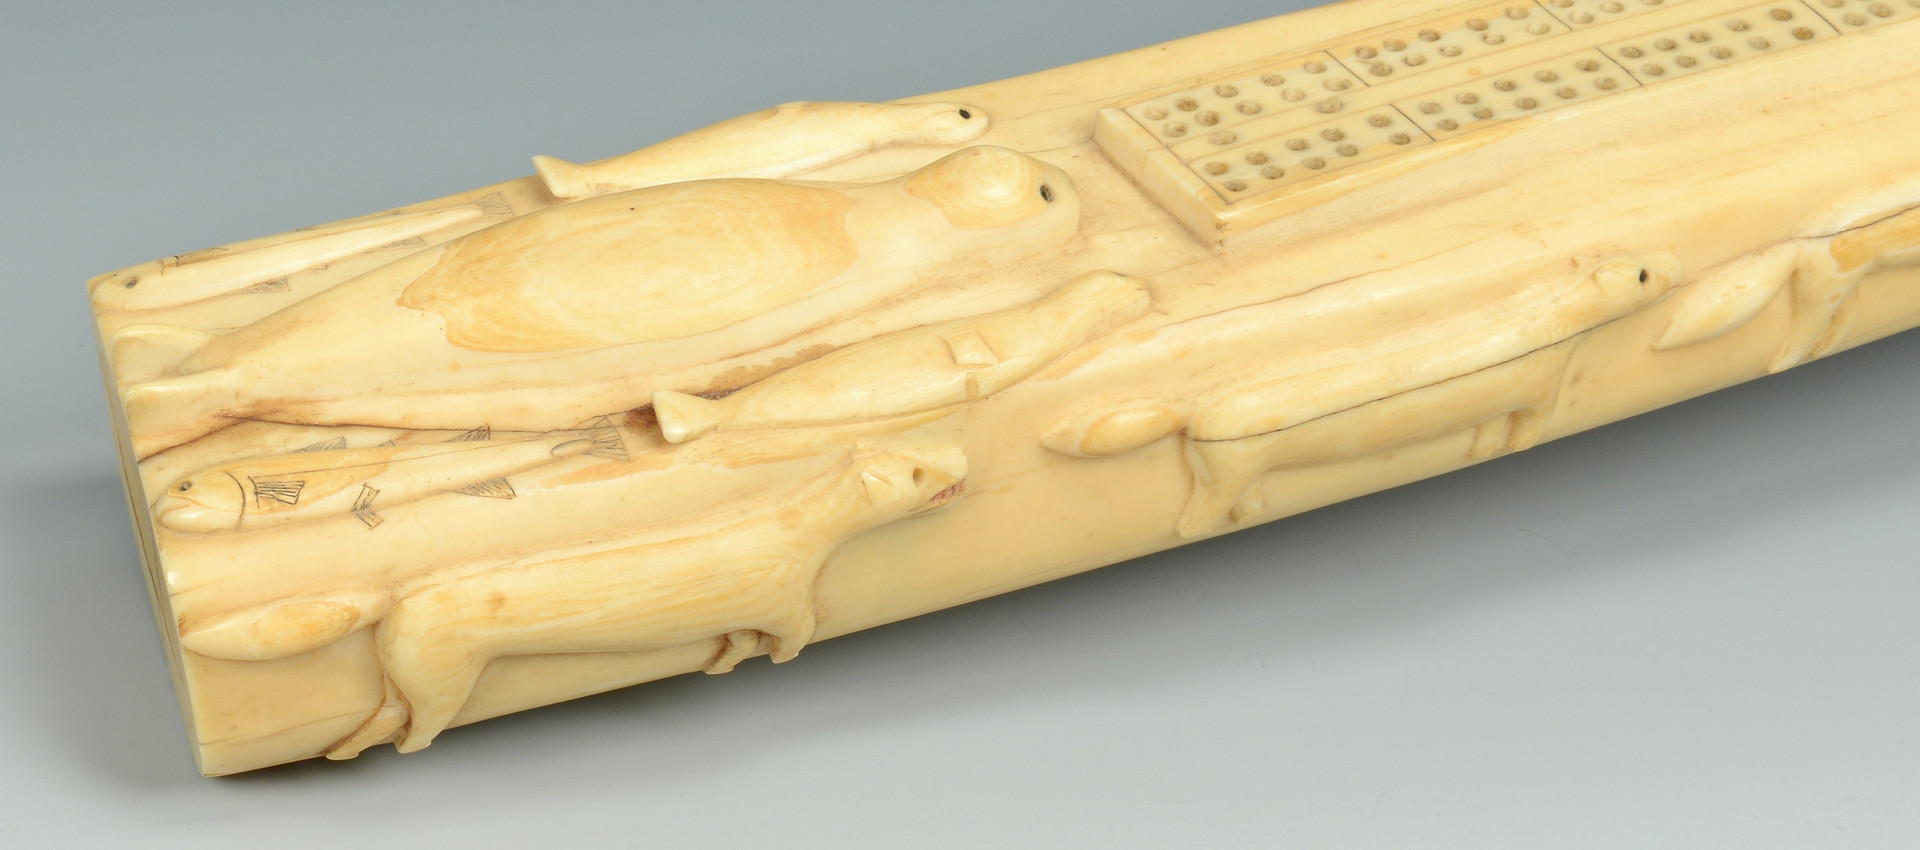 Lot 319: Early Inuit Carved Cribbage Board, Walrus